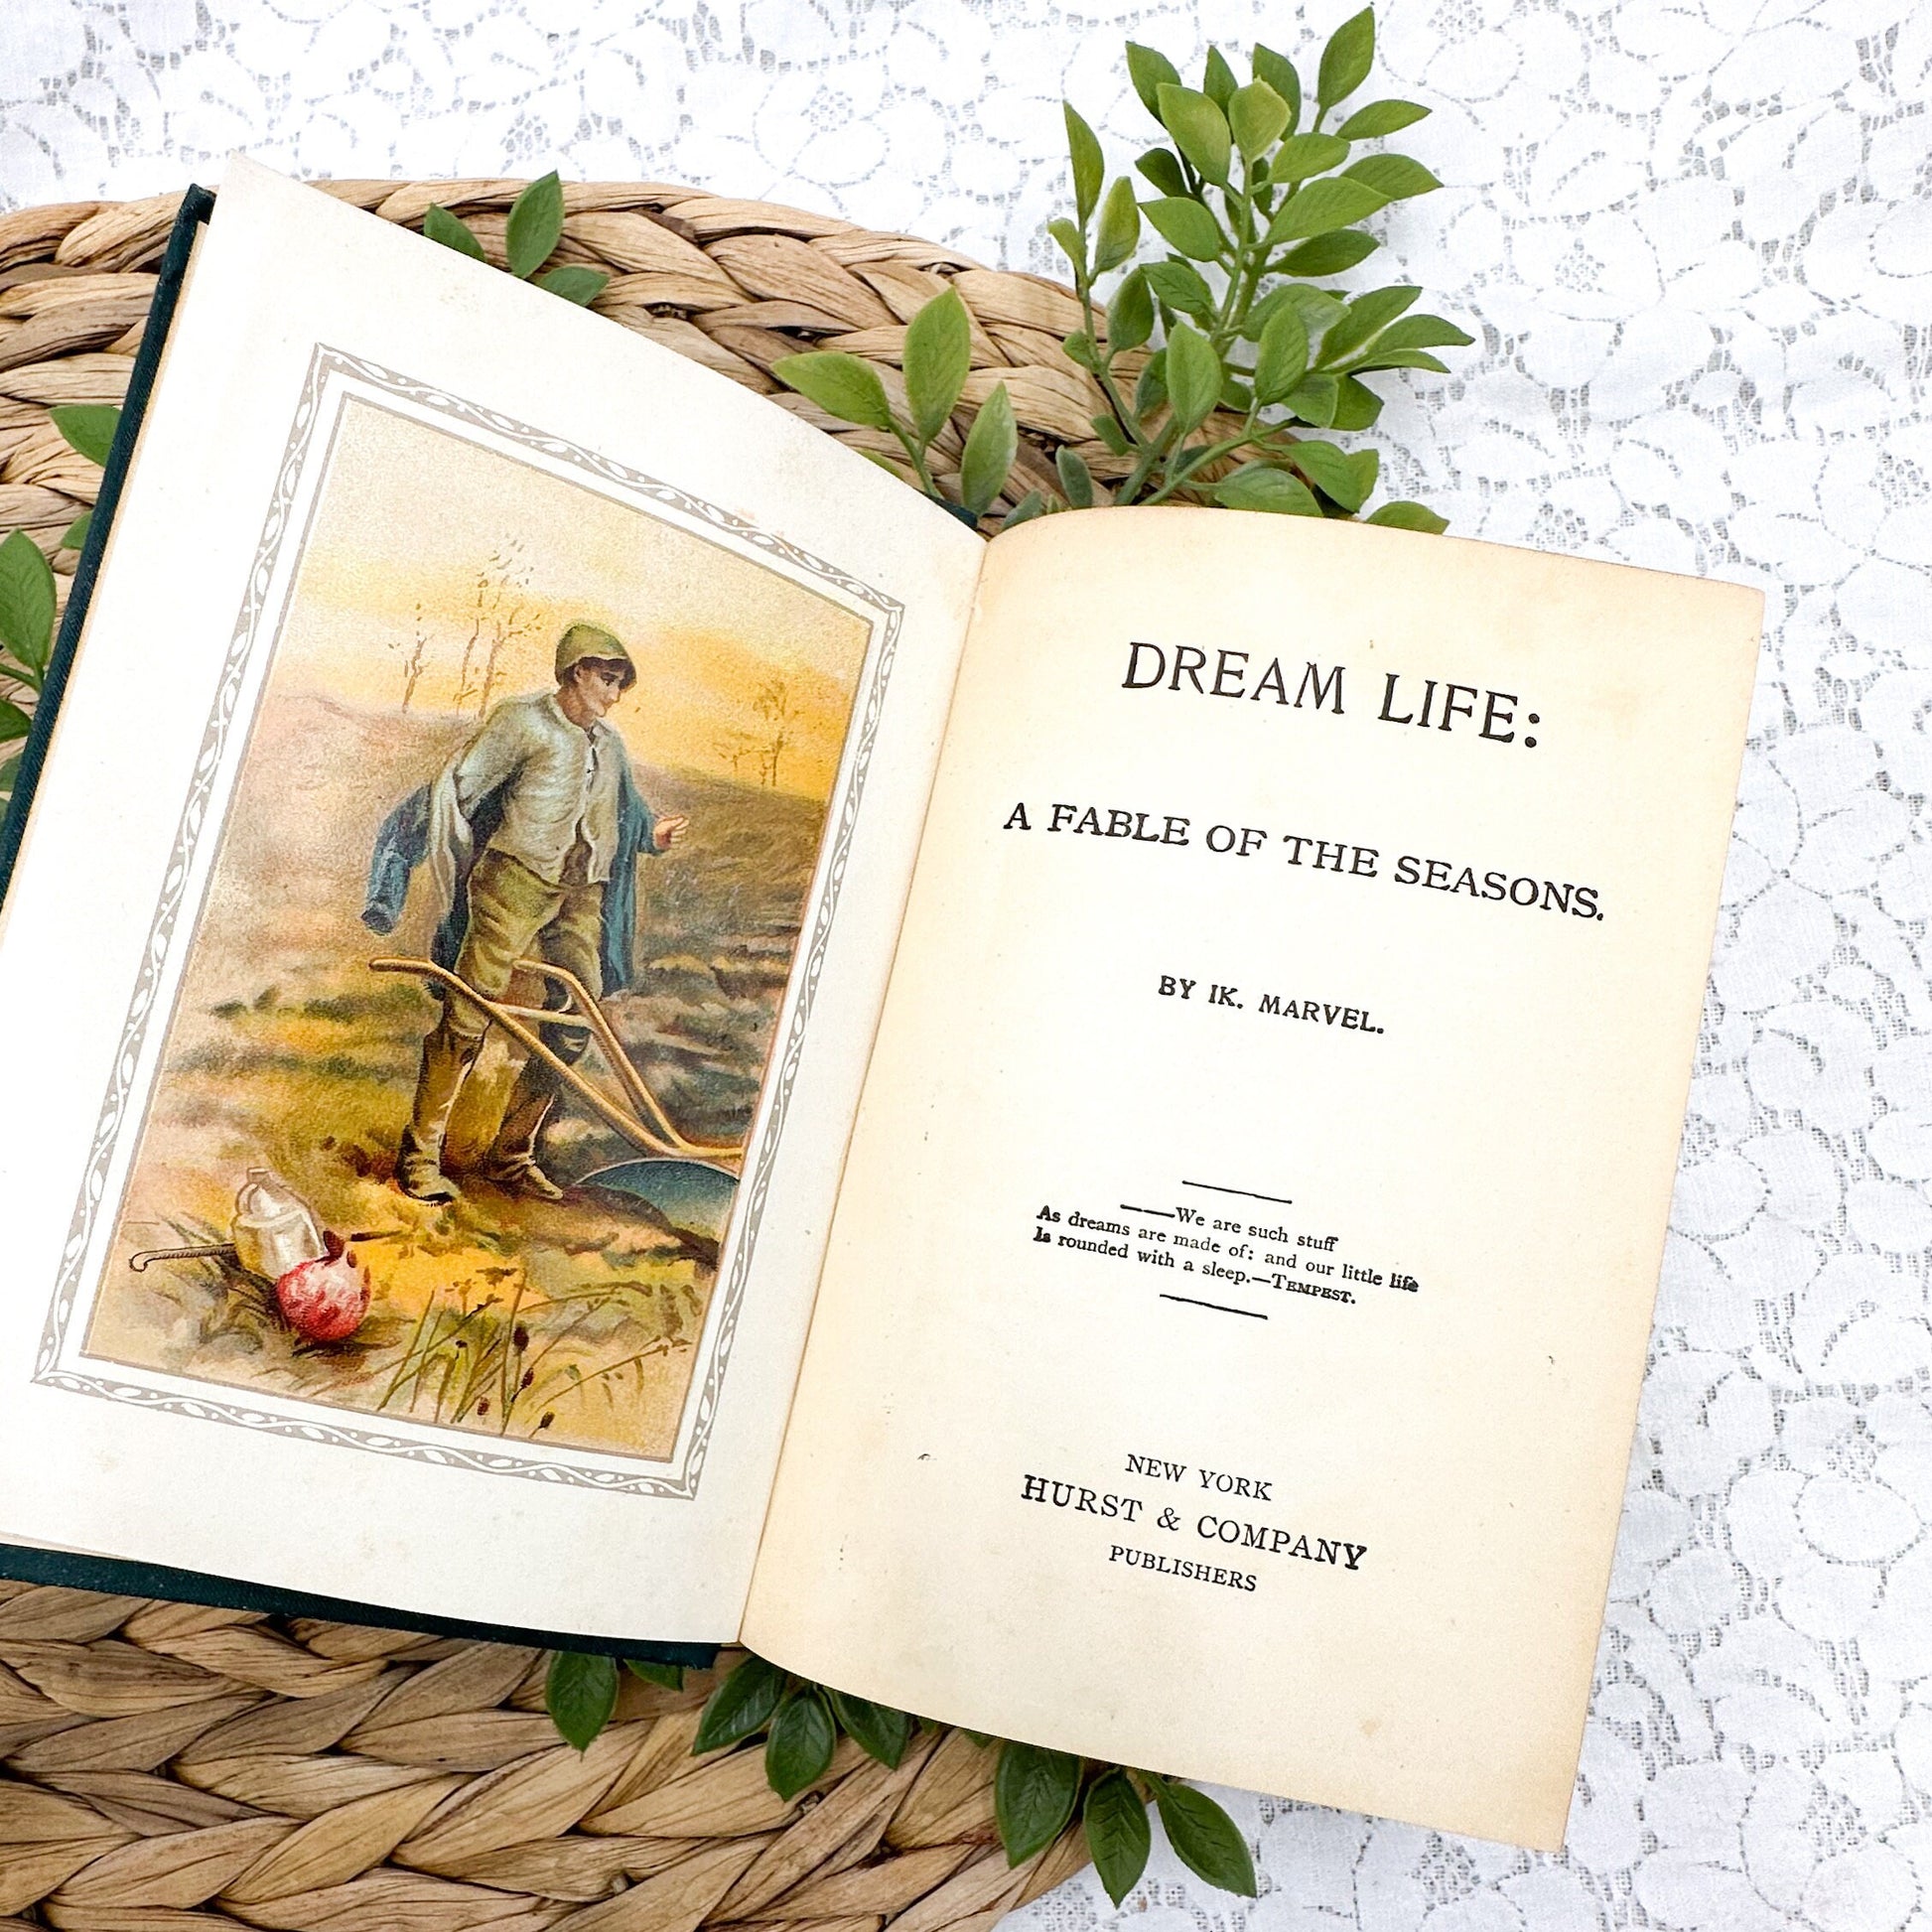 Dream Life: A Fable of the Seasons by IK Marvel